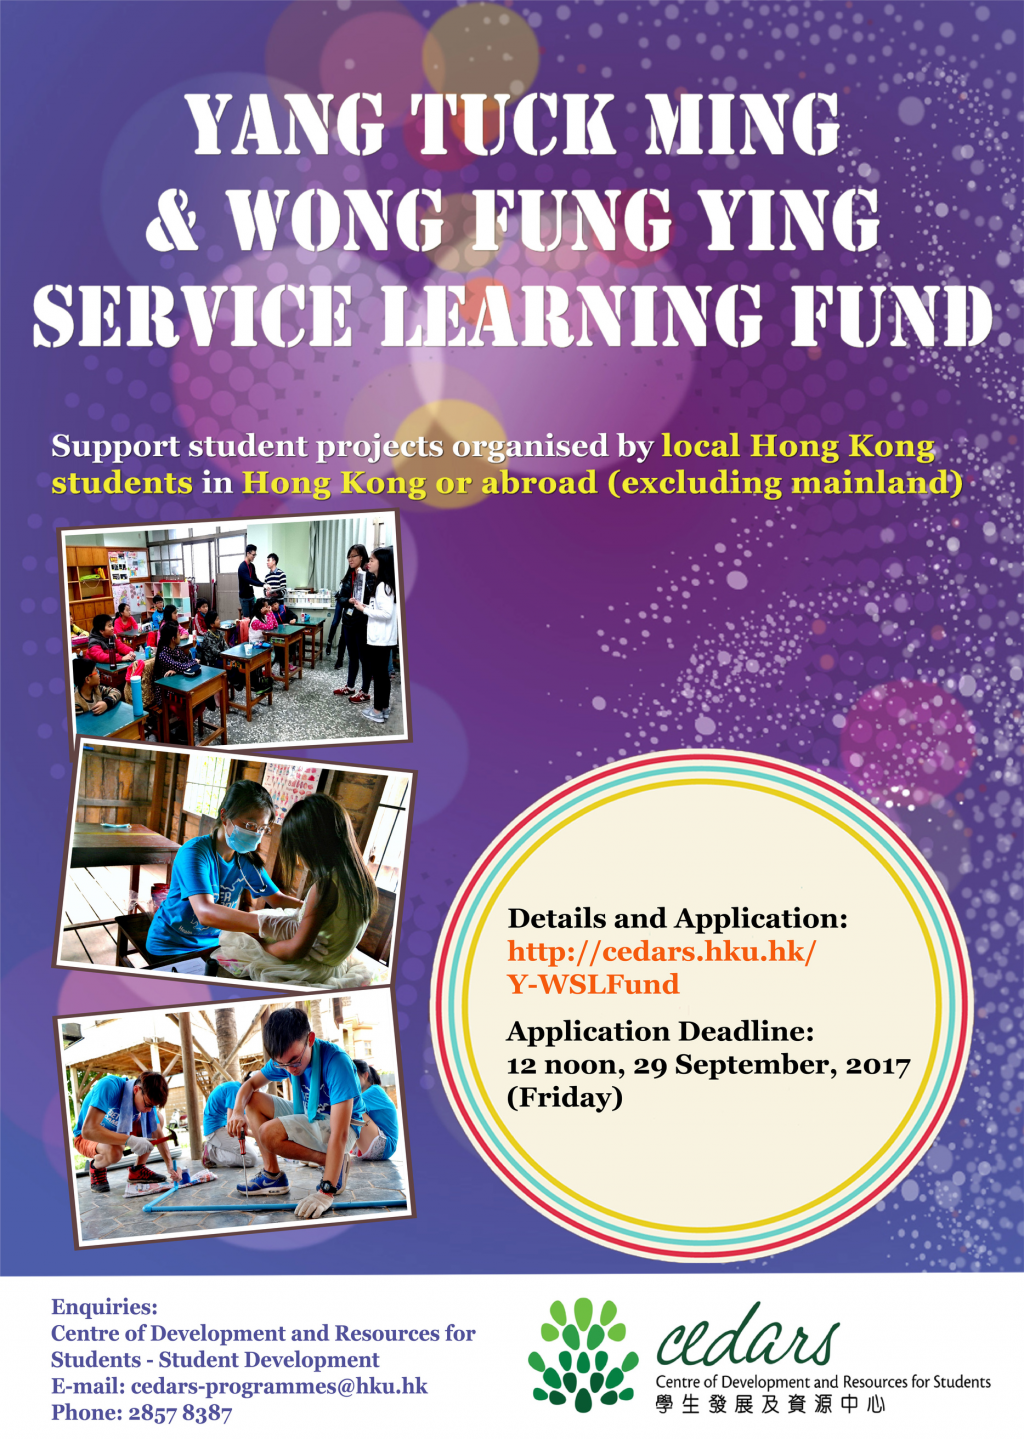 Application for Yang Tuck Ming & Wong Fung Ying Service Learning Fund